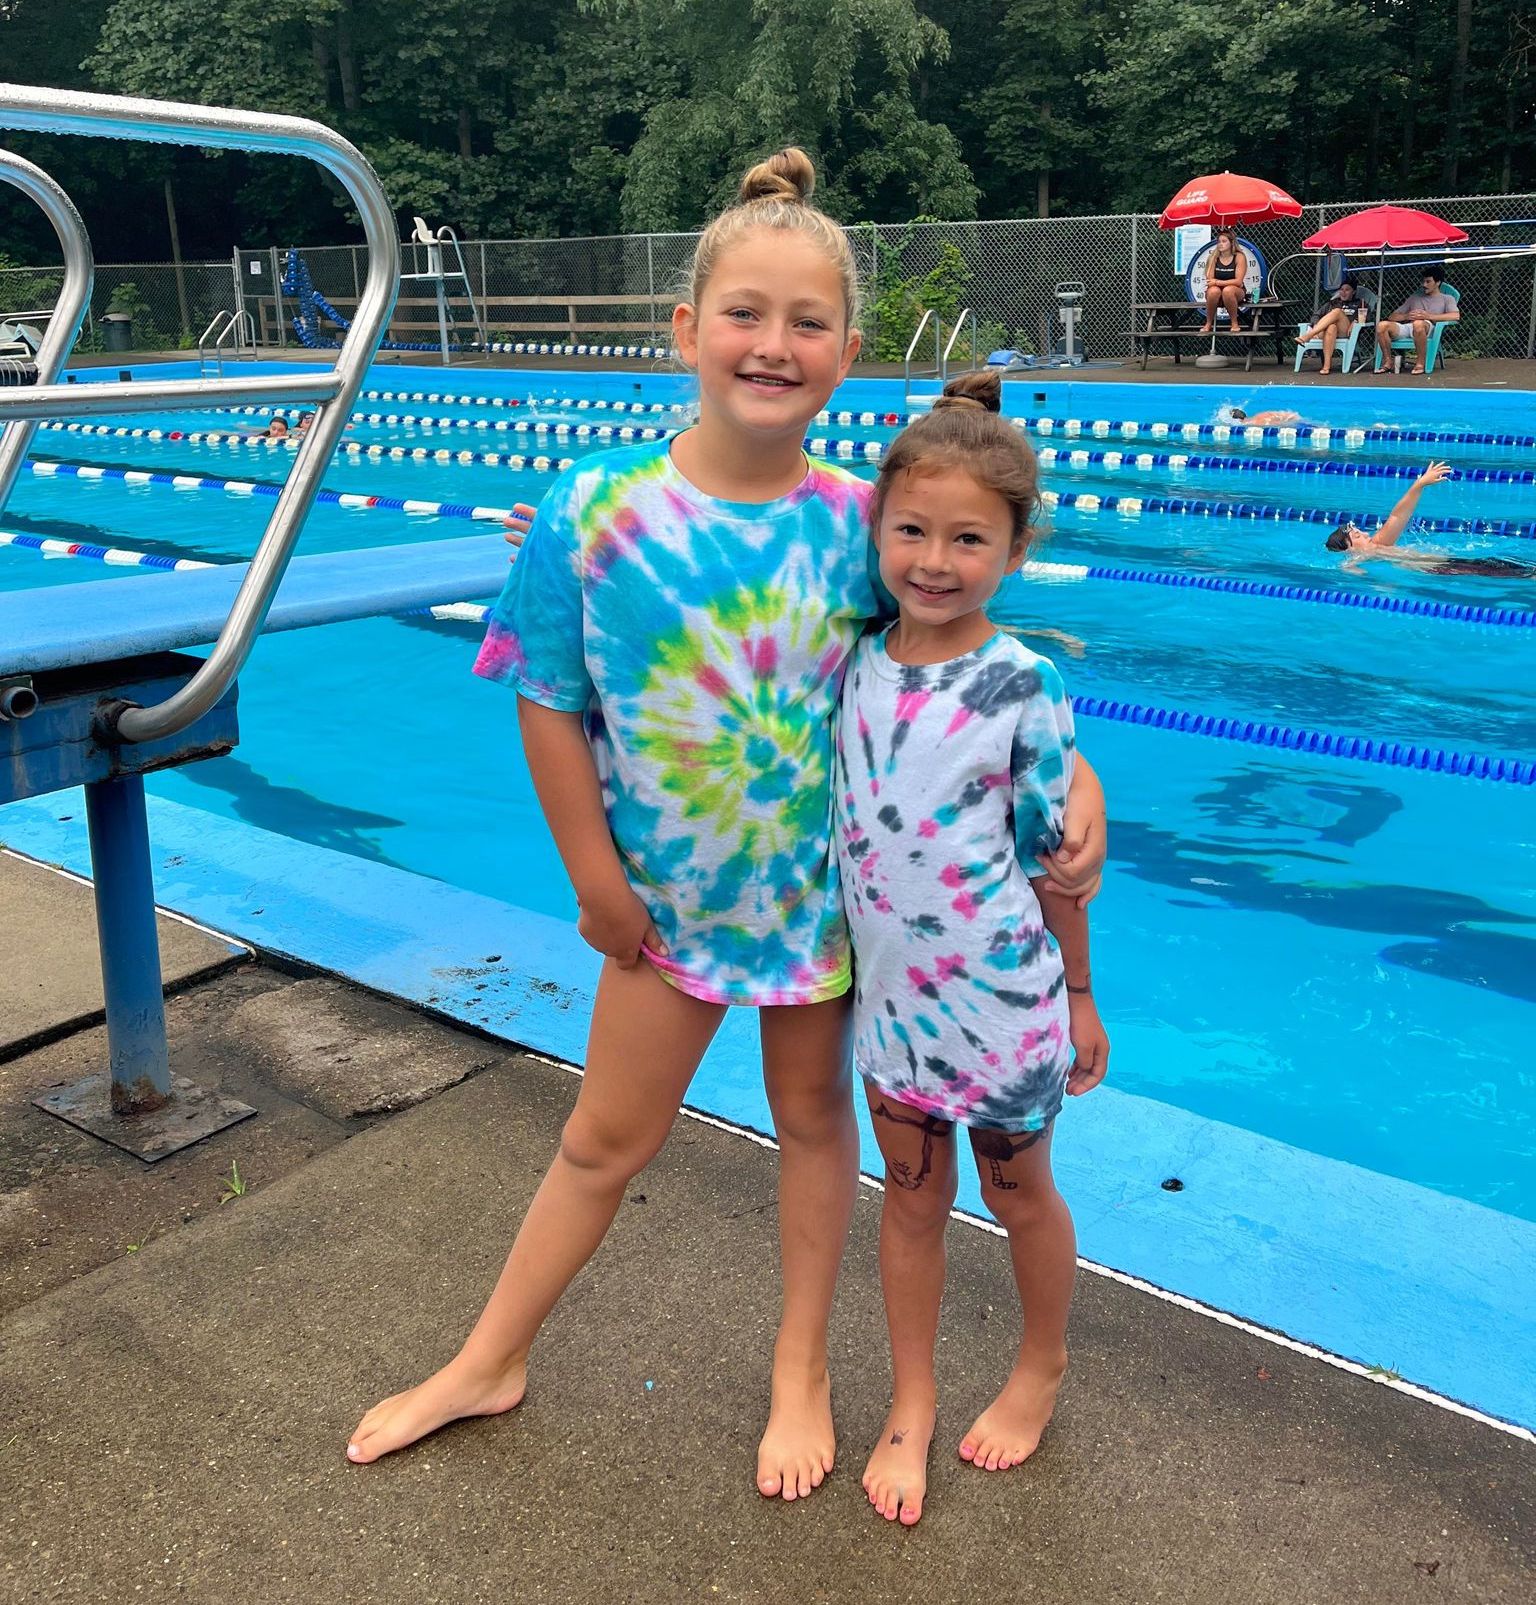 Myla and Maddie Kovacs participate in the Swim-a-thon